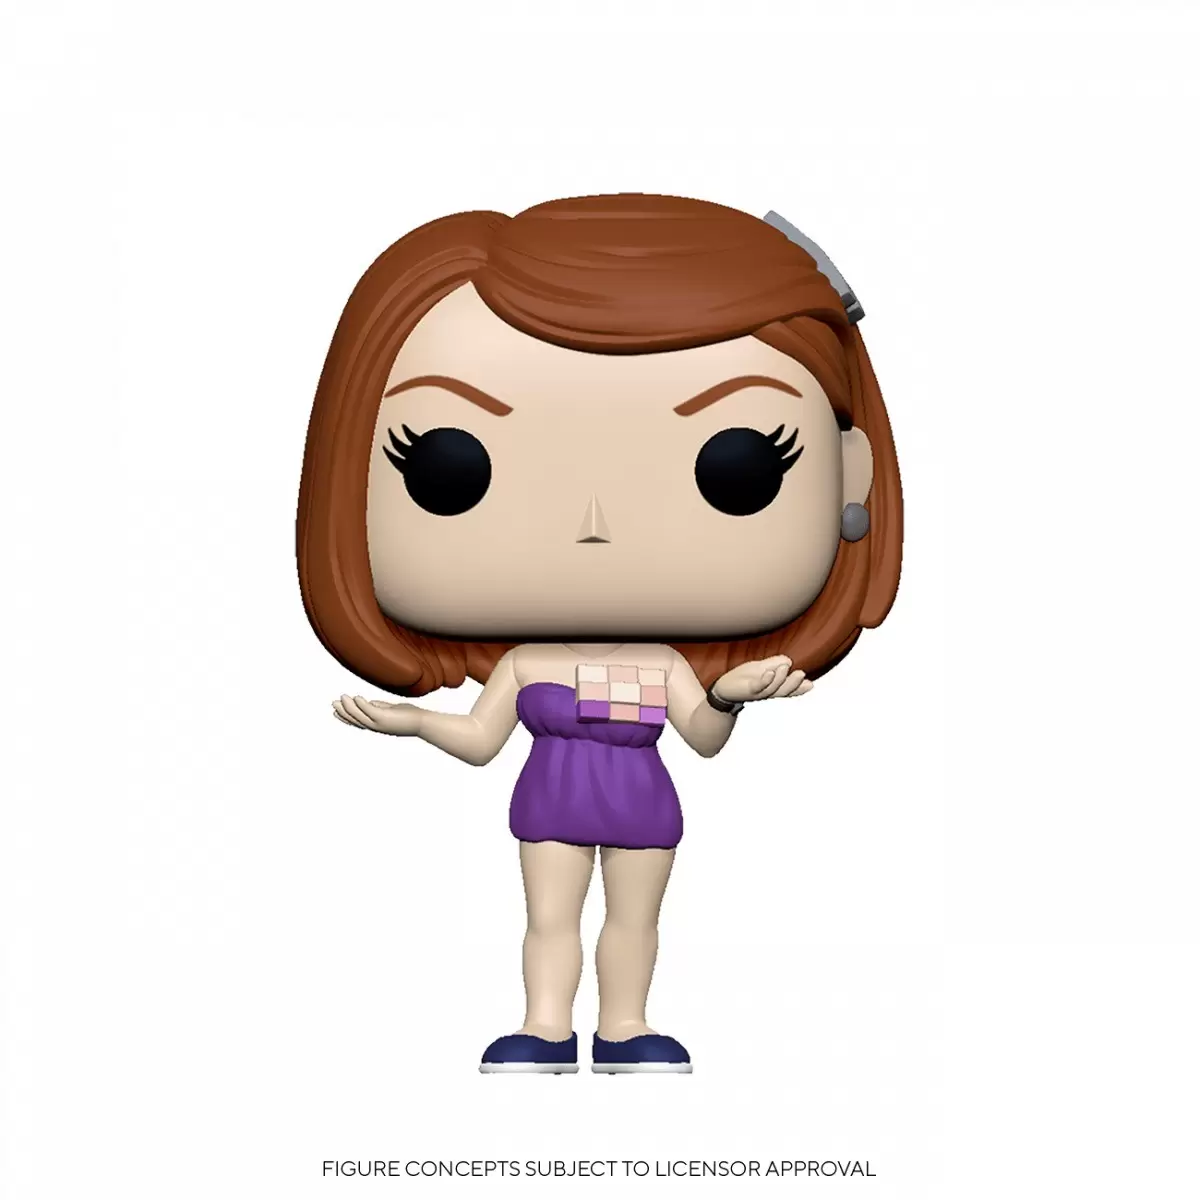 POP! Television - The Office - Meredith Plamer